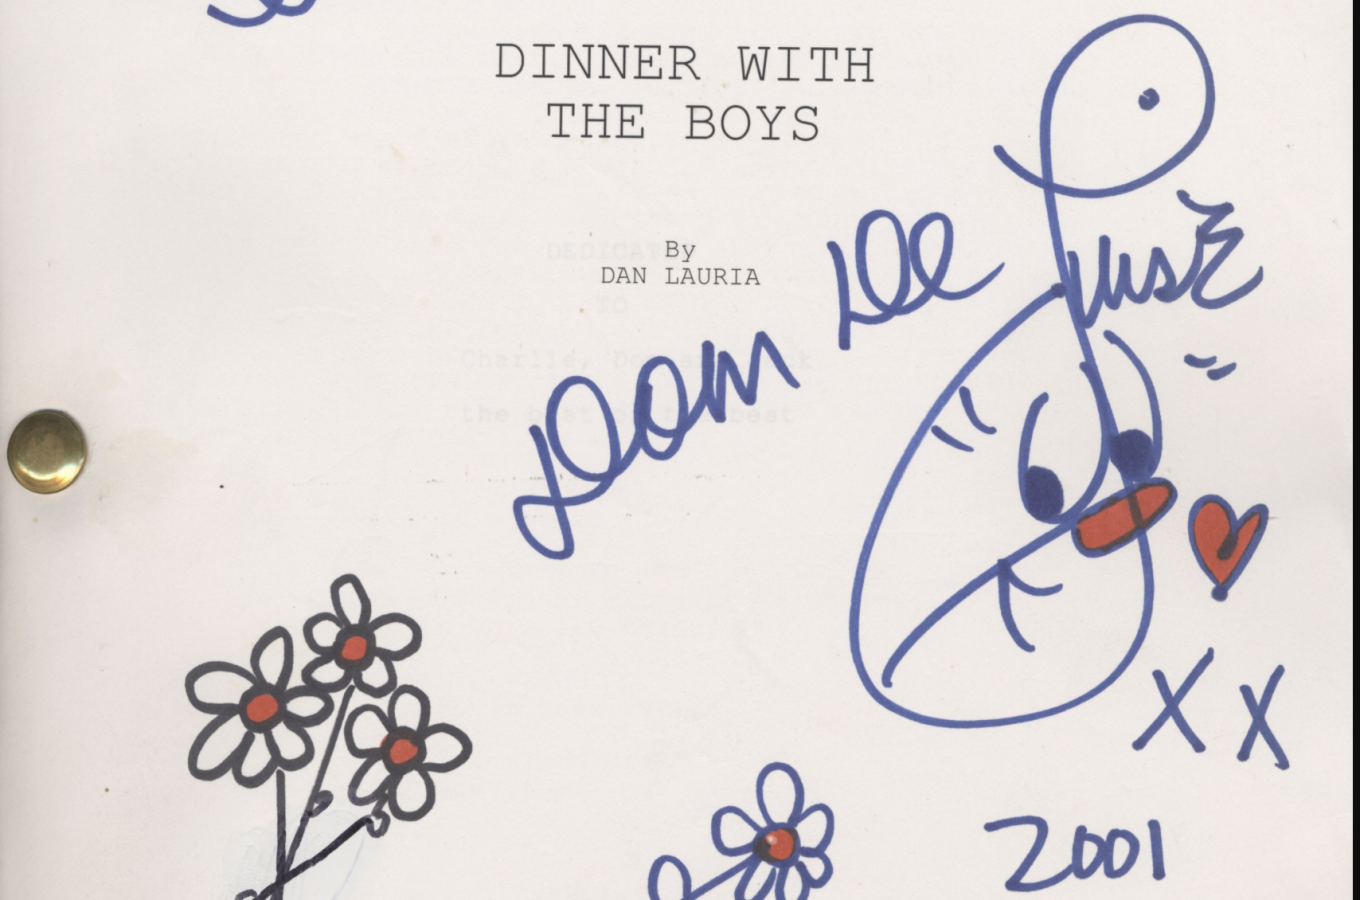 Script title page which reads: "Dinner with the Boys" by Dan Lauria